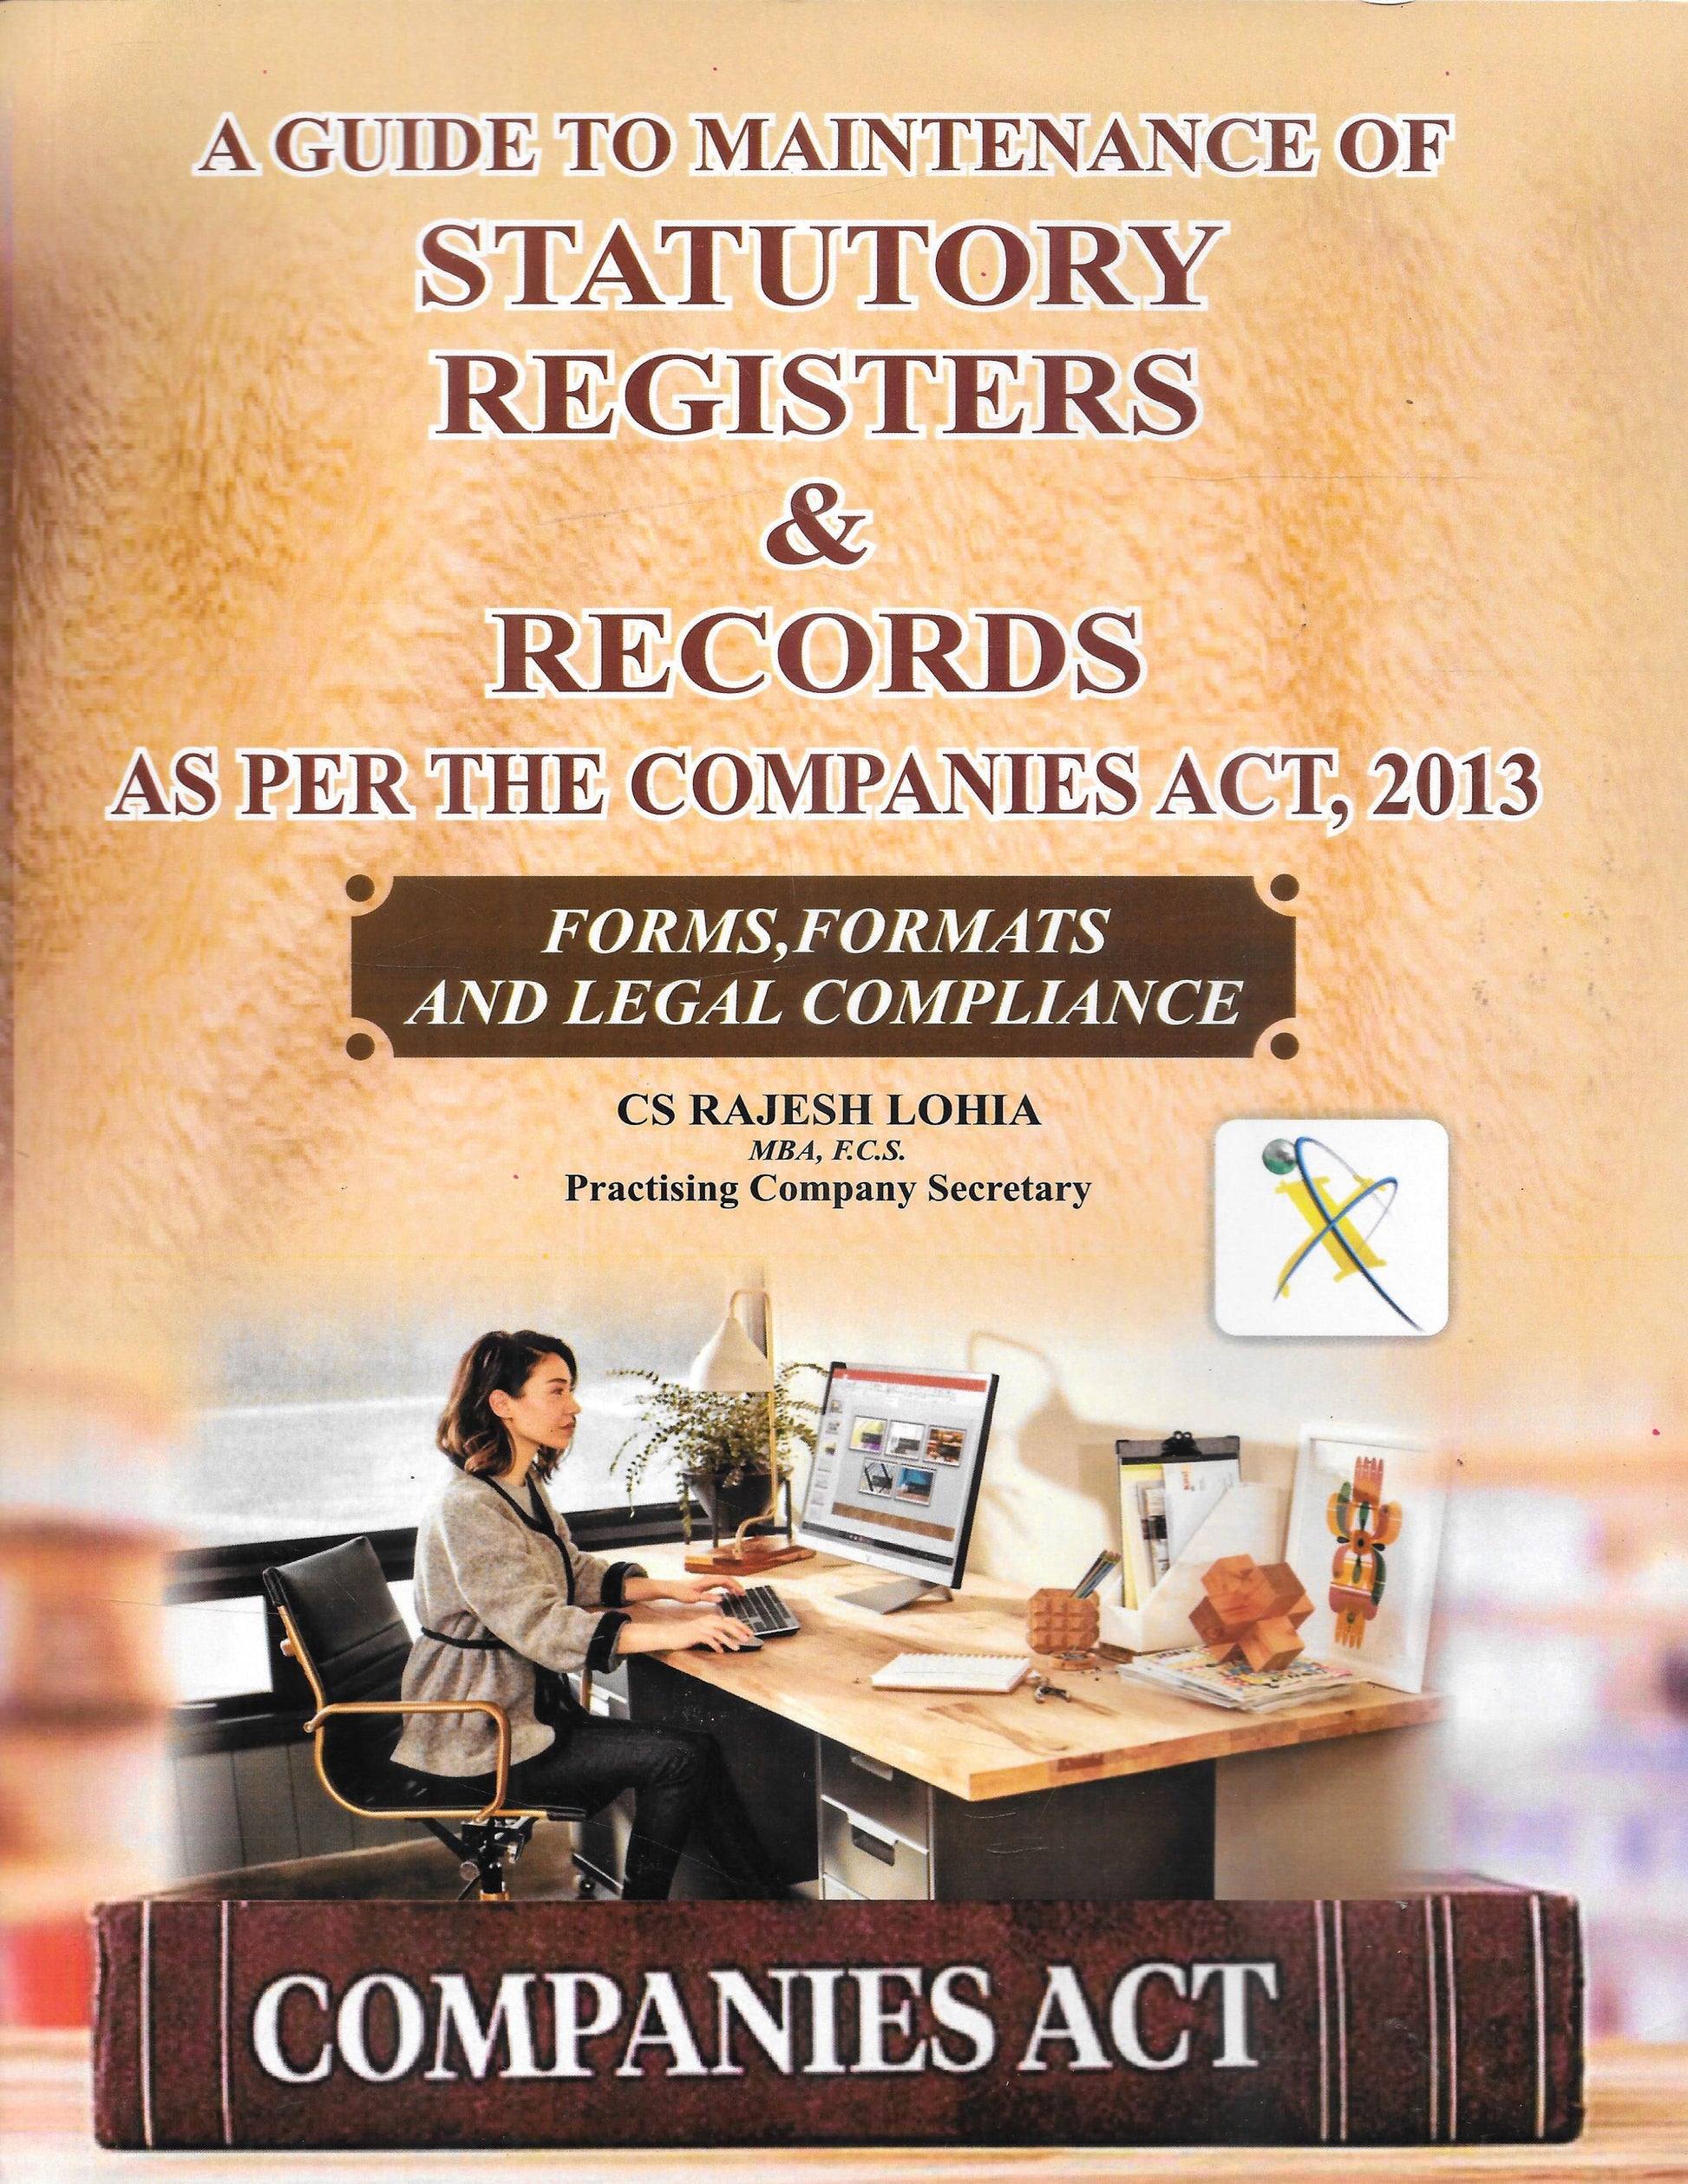 A Guide to Maintenance of Statutory Registers & Records as per the Companies Act, 2013